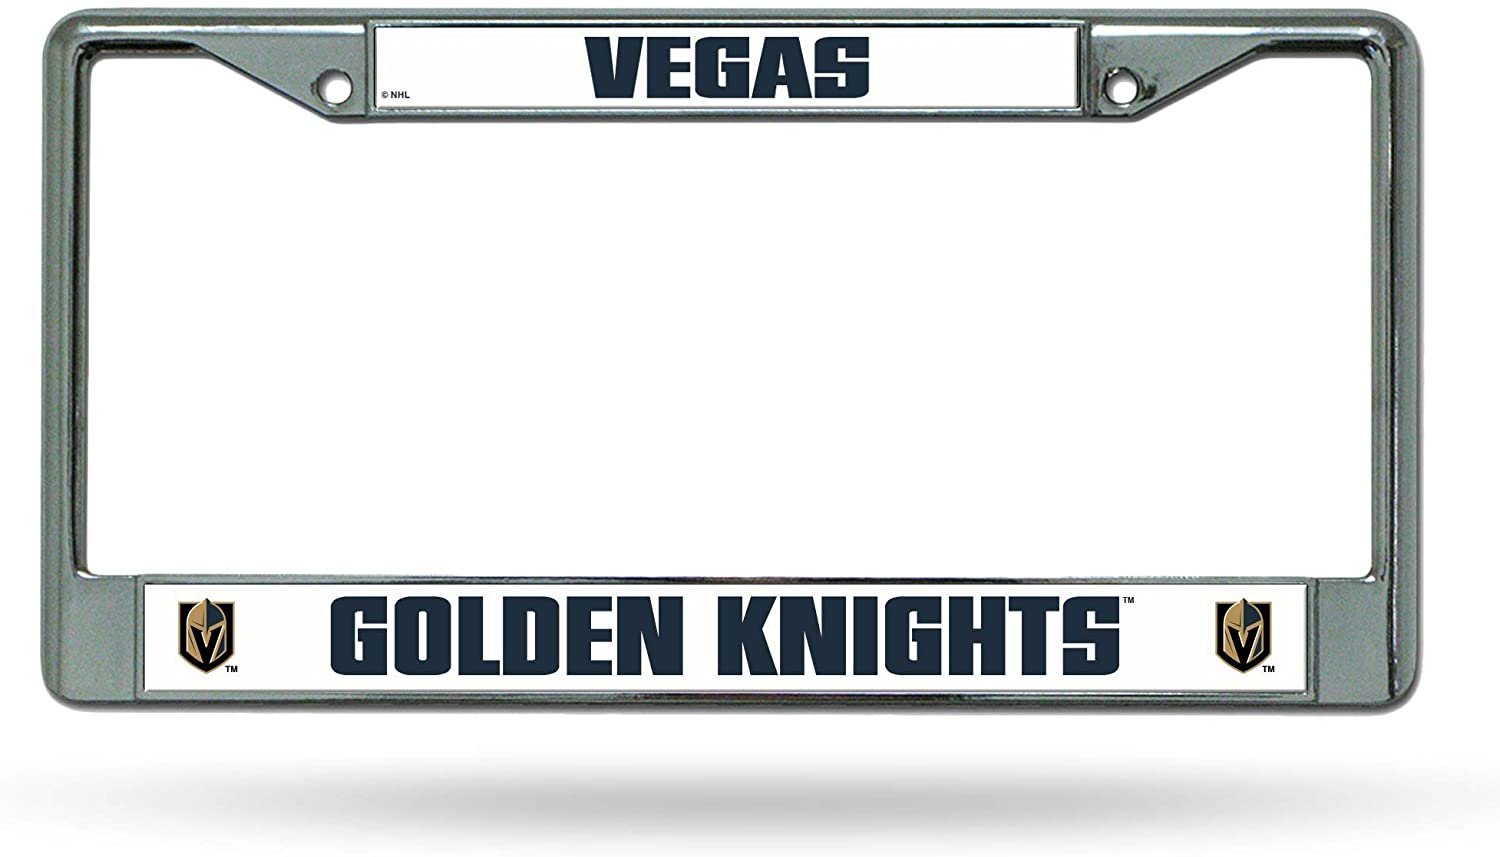 Vegas Golden Knights Premium Metal License Plate Frame Chrome Tag Cover, 6x12 Inch